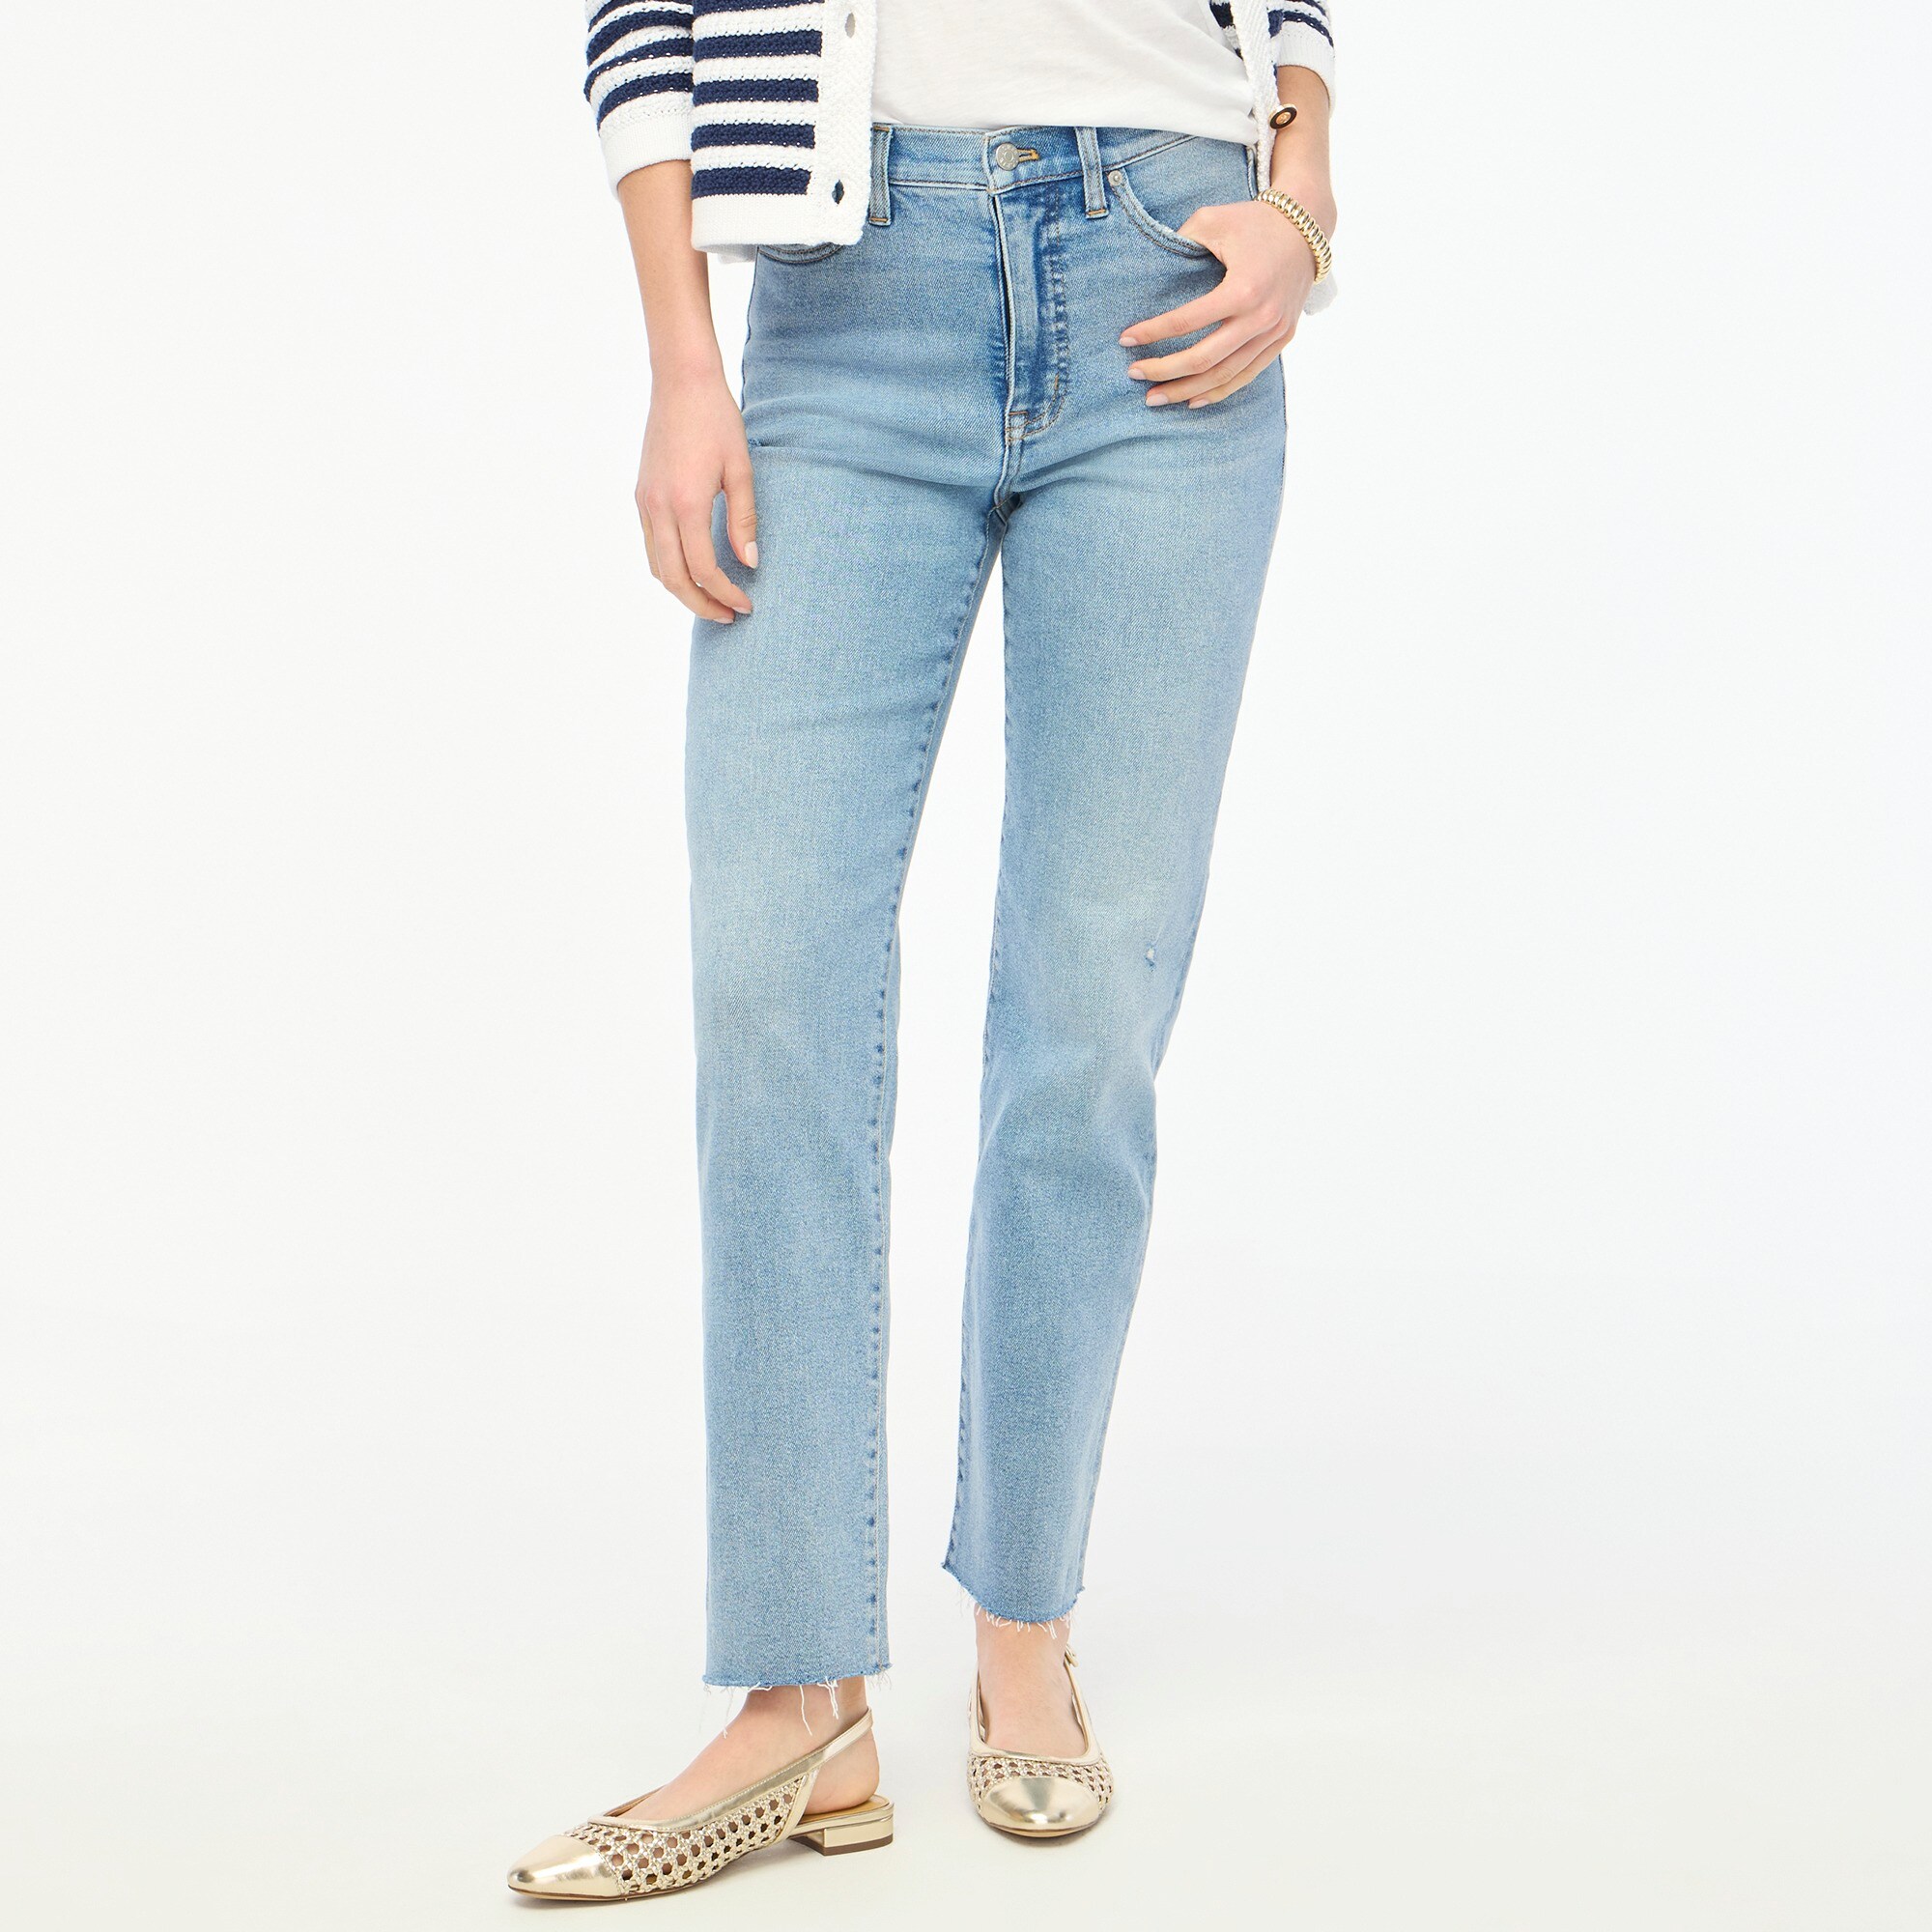  Tall stovepipe straight jean in signature stretch+